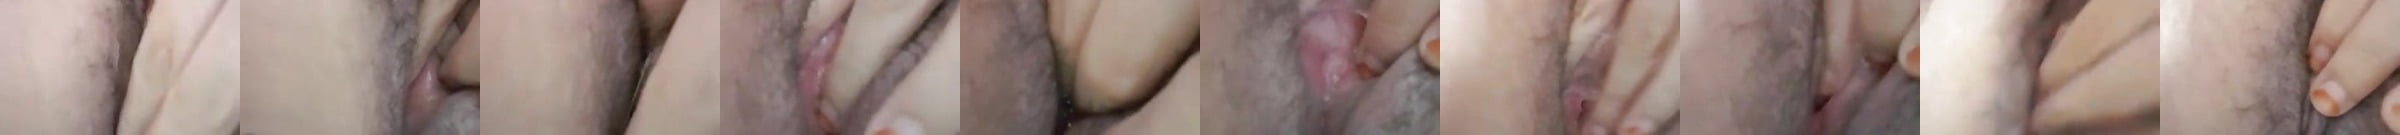 Free Featured Virgin Pussy Fingering Porn Videos 2022 XHamster